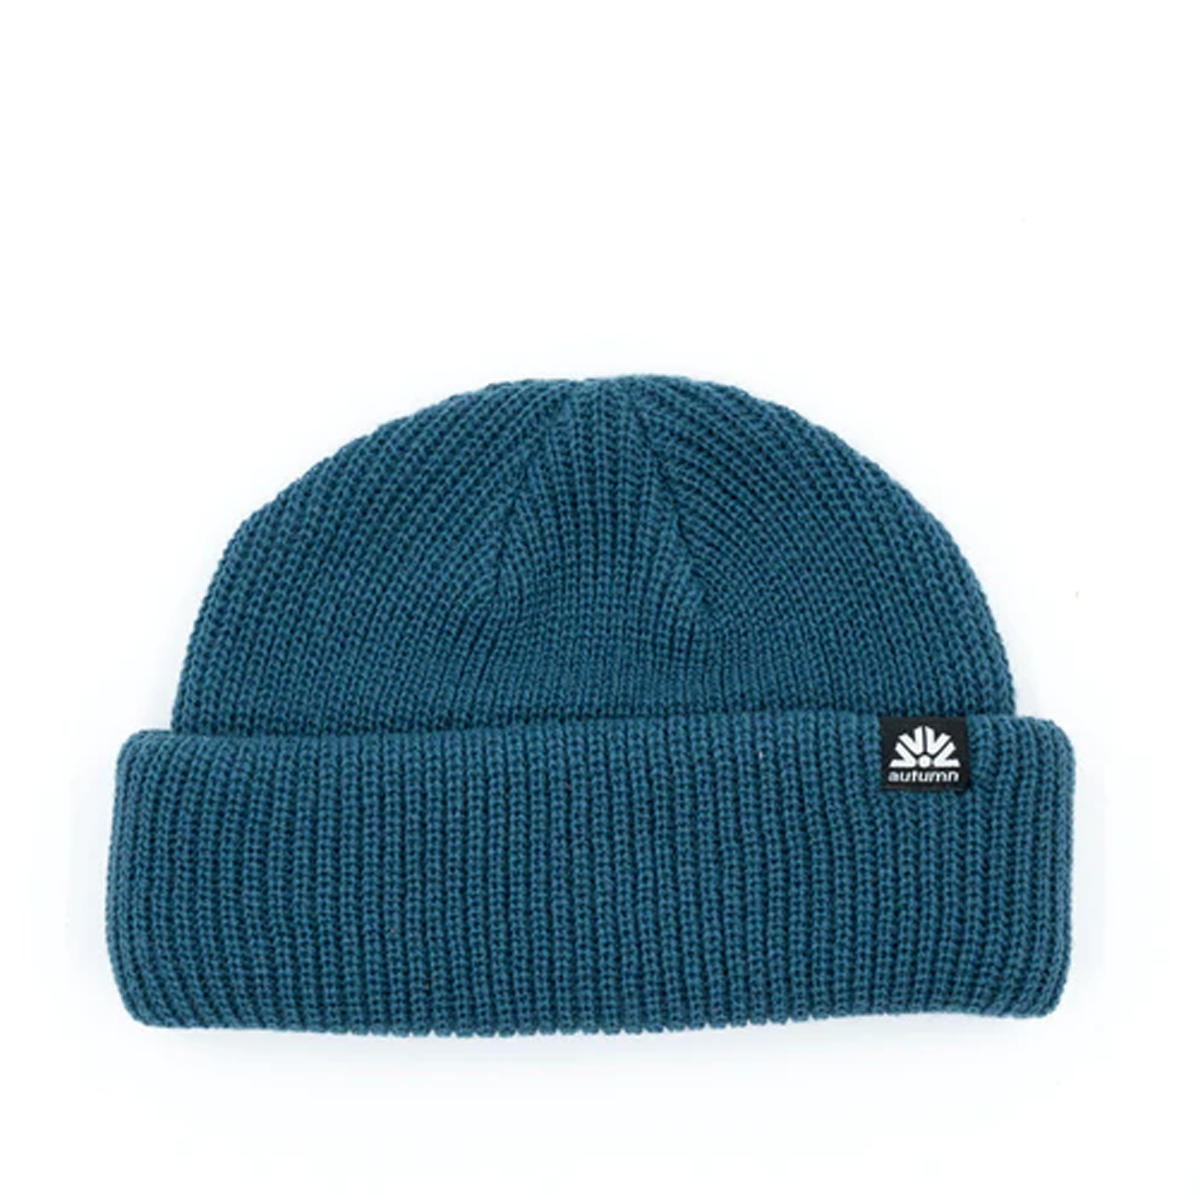 Autumn Shorty Double Roll Beanie - Assorted